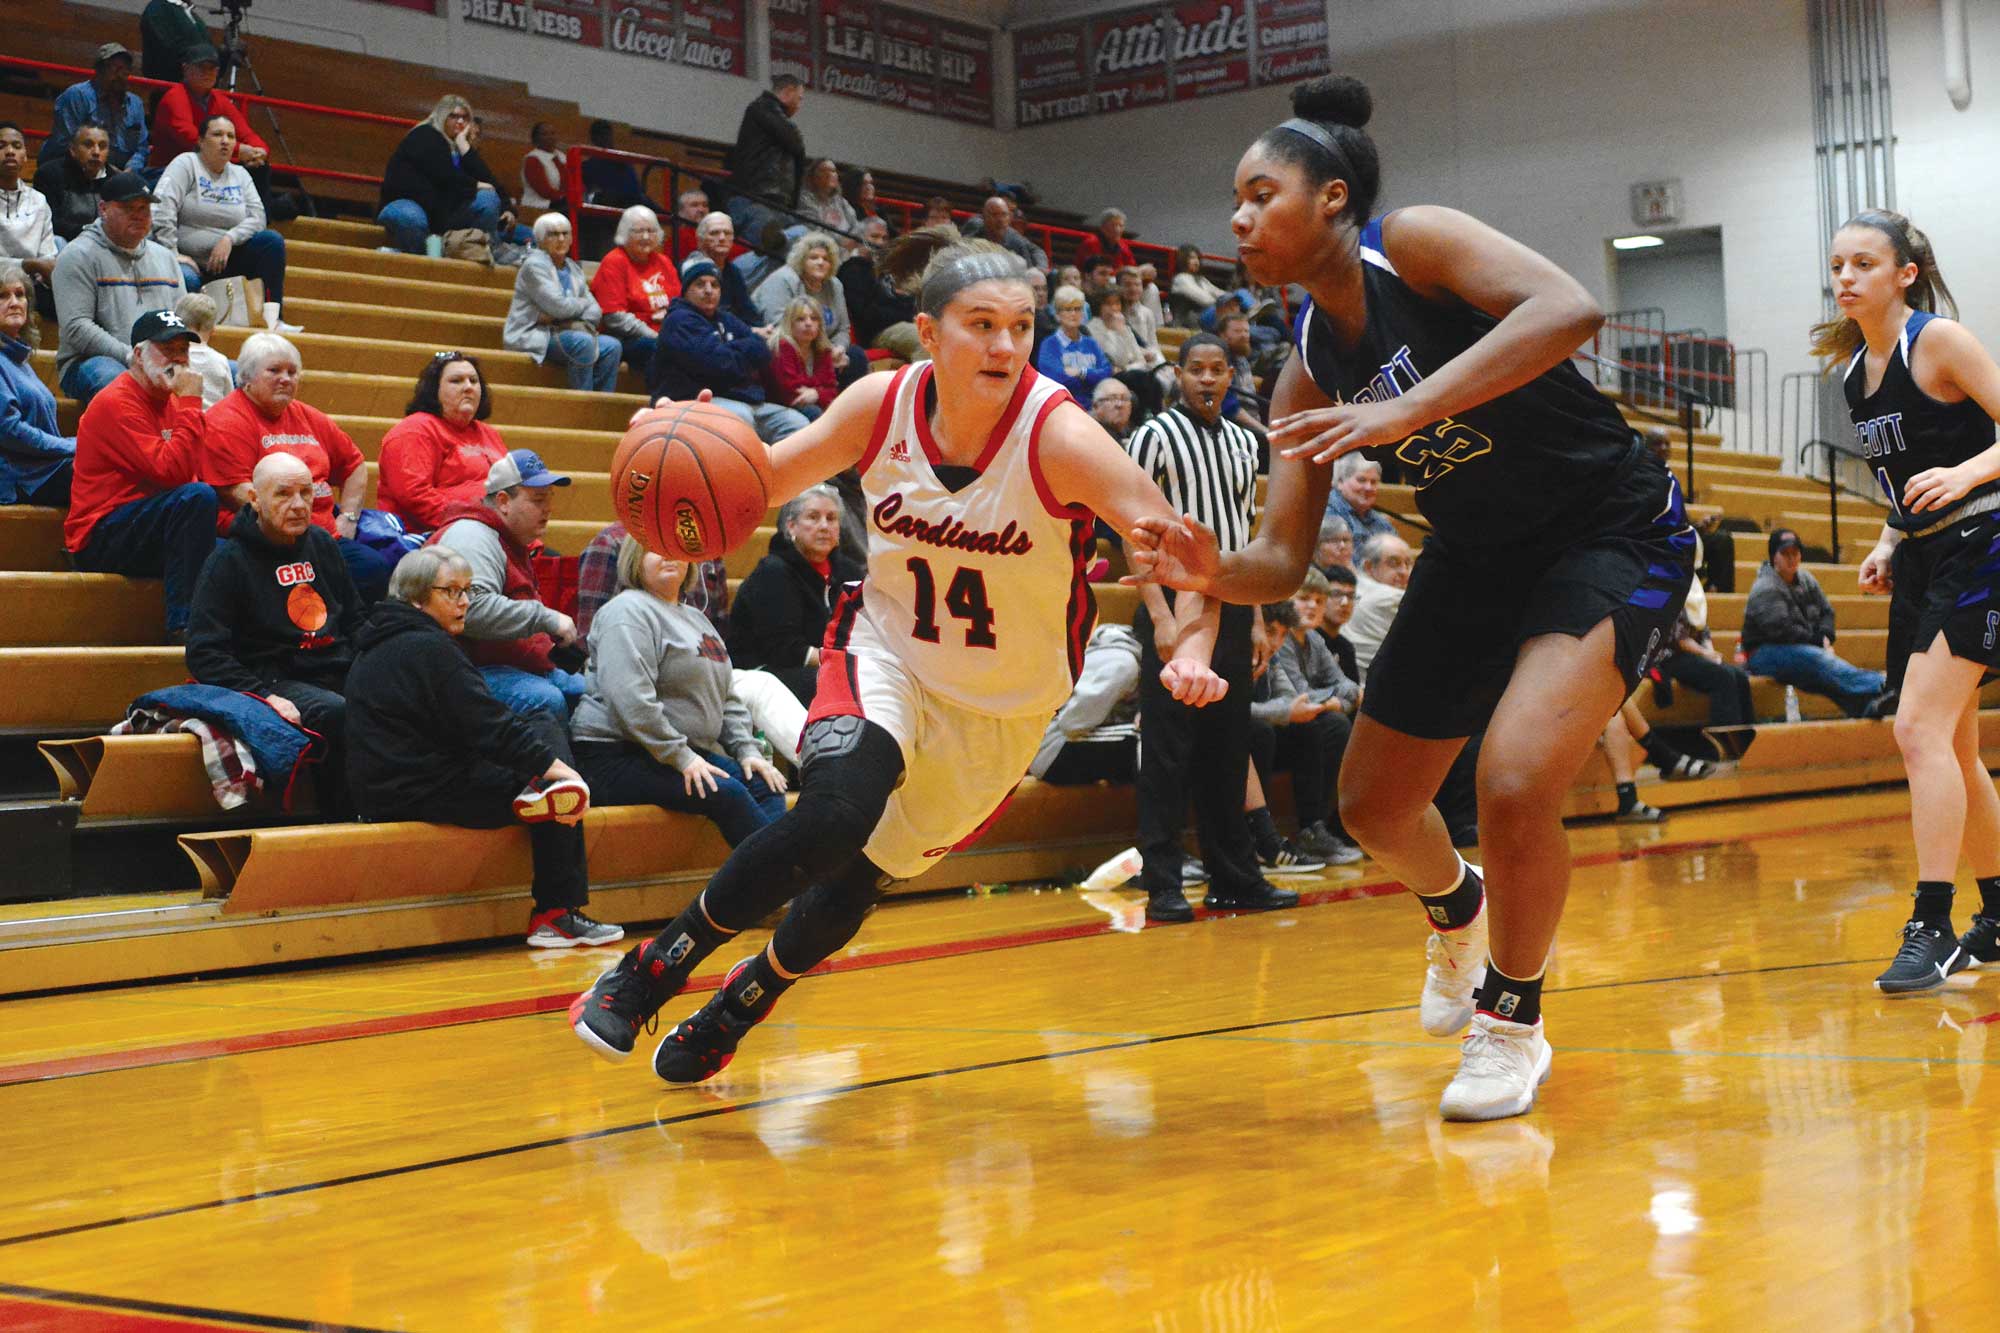 Lady Cardinals advance to semifinals of Queen of the Commonwealth